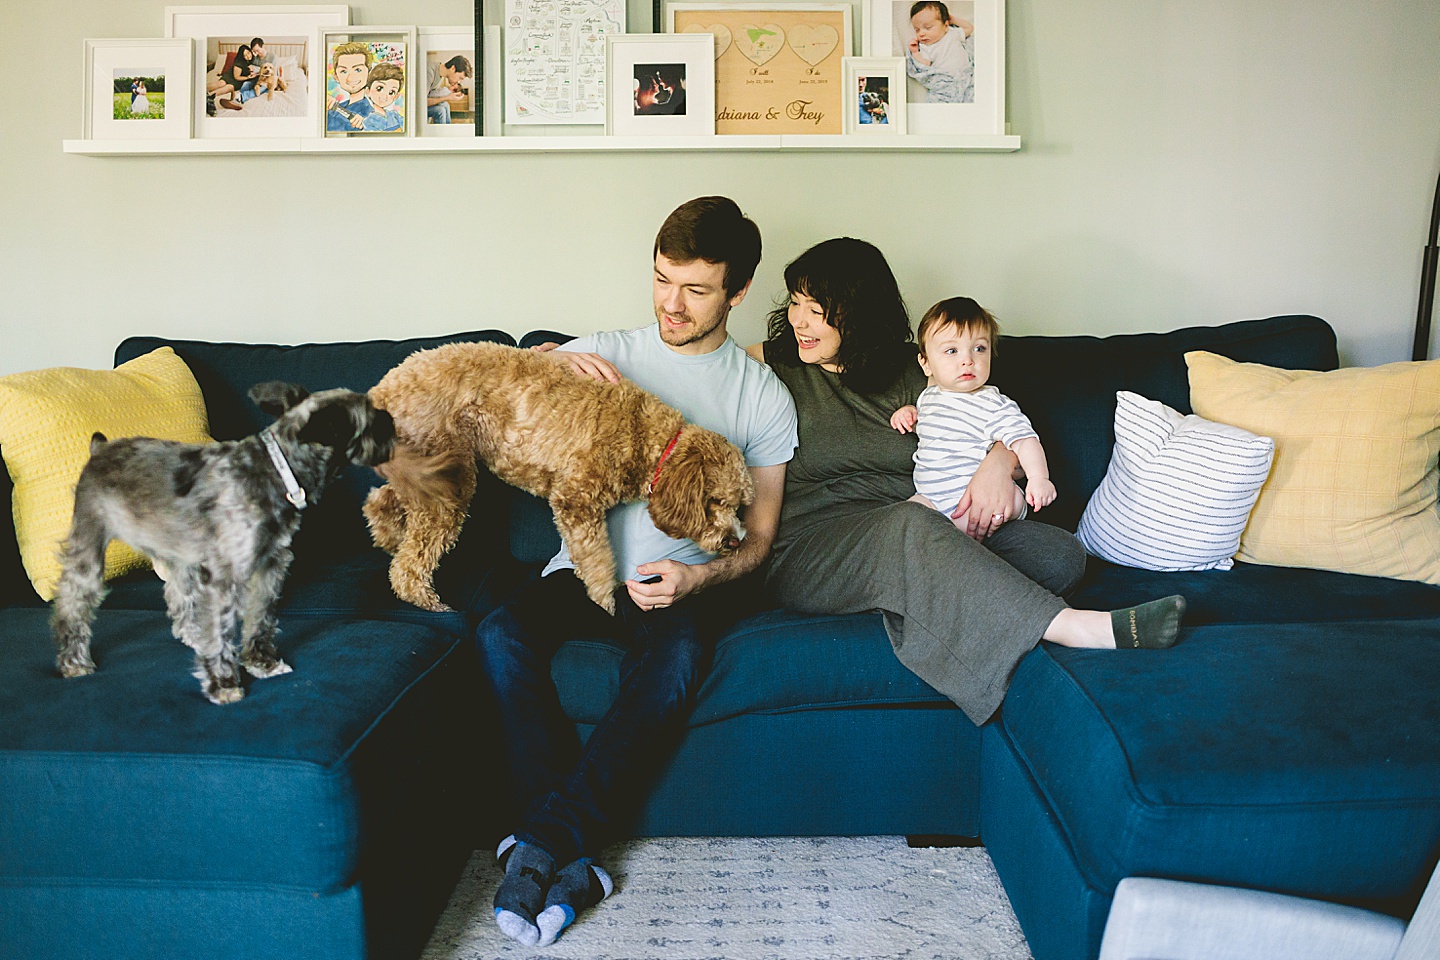 Family laughing and sitting on couch together with dogs